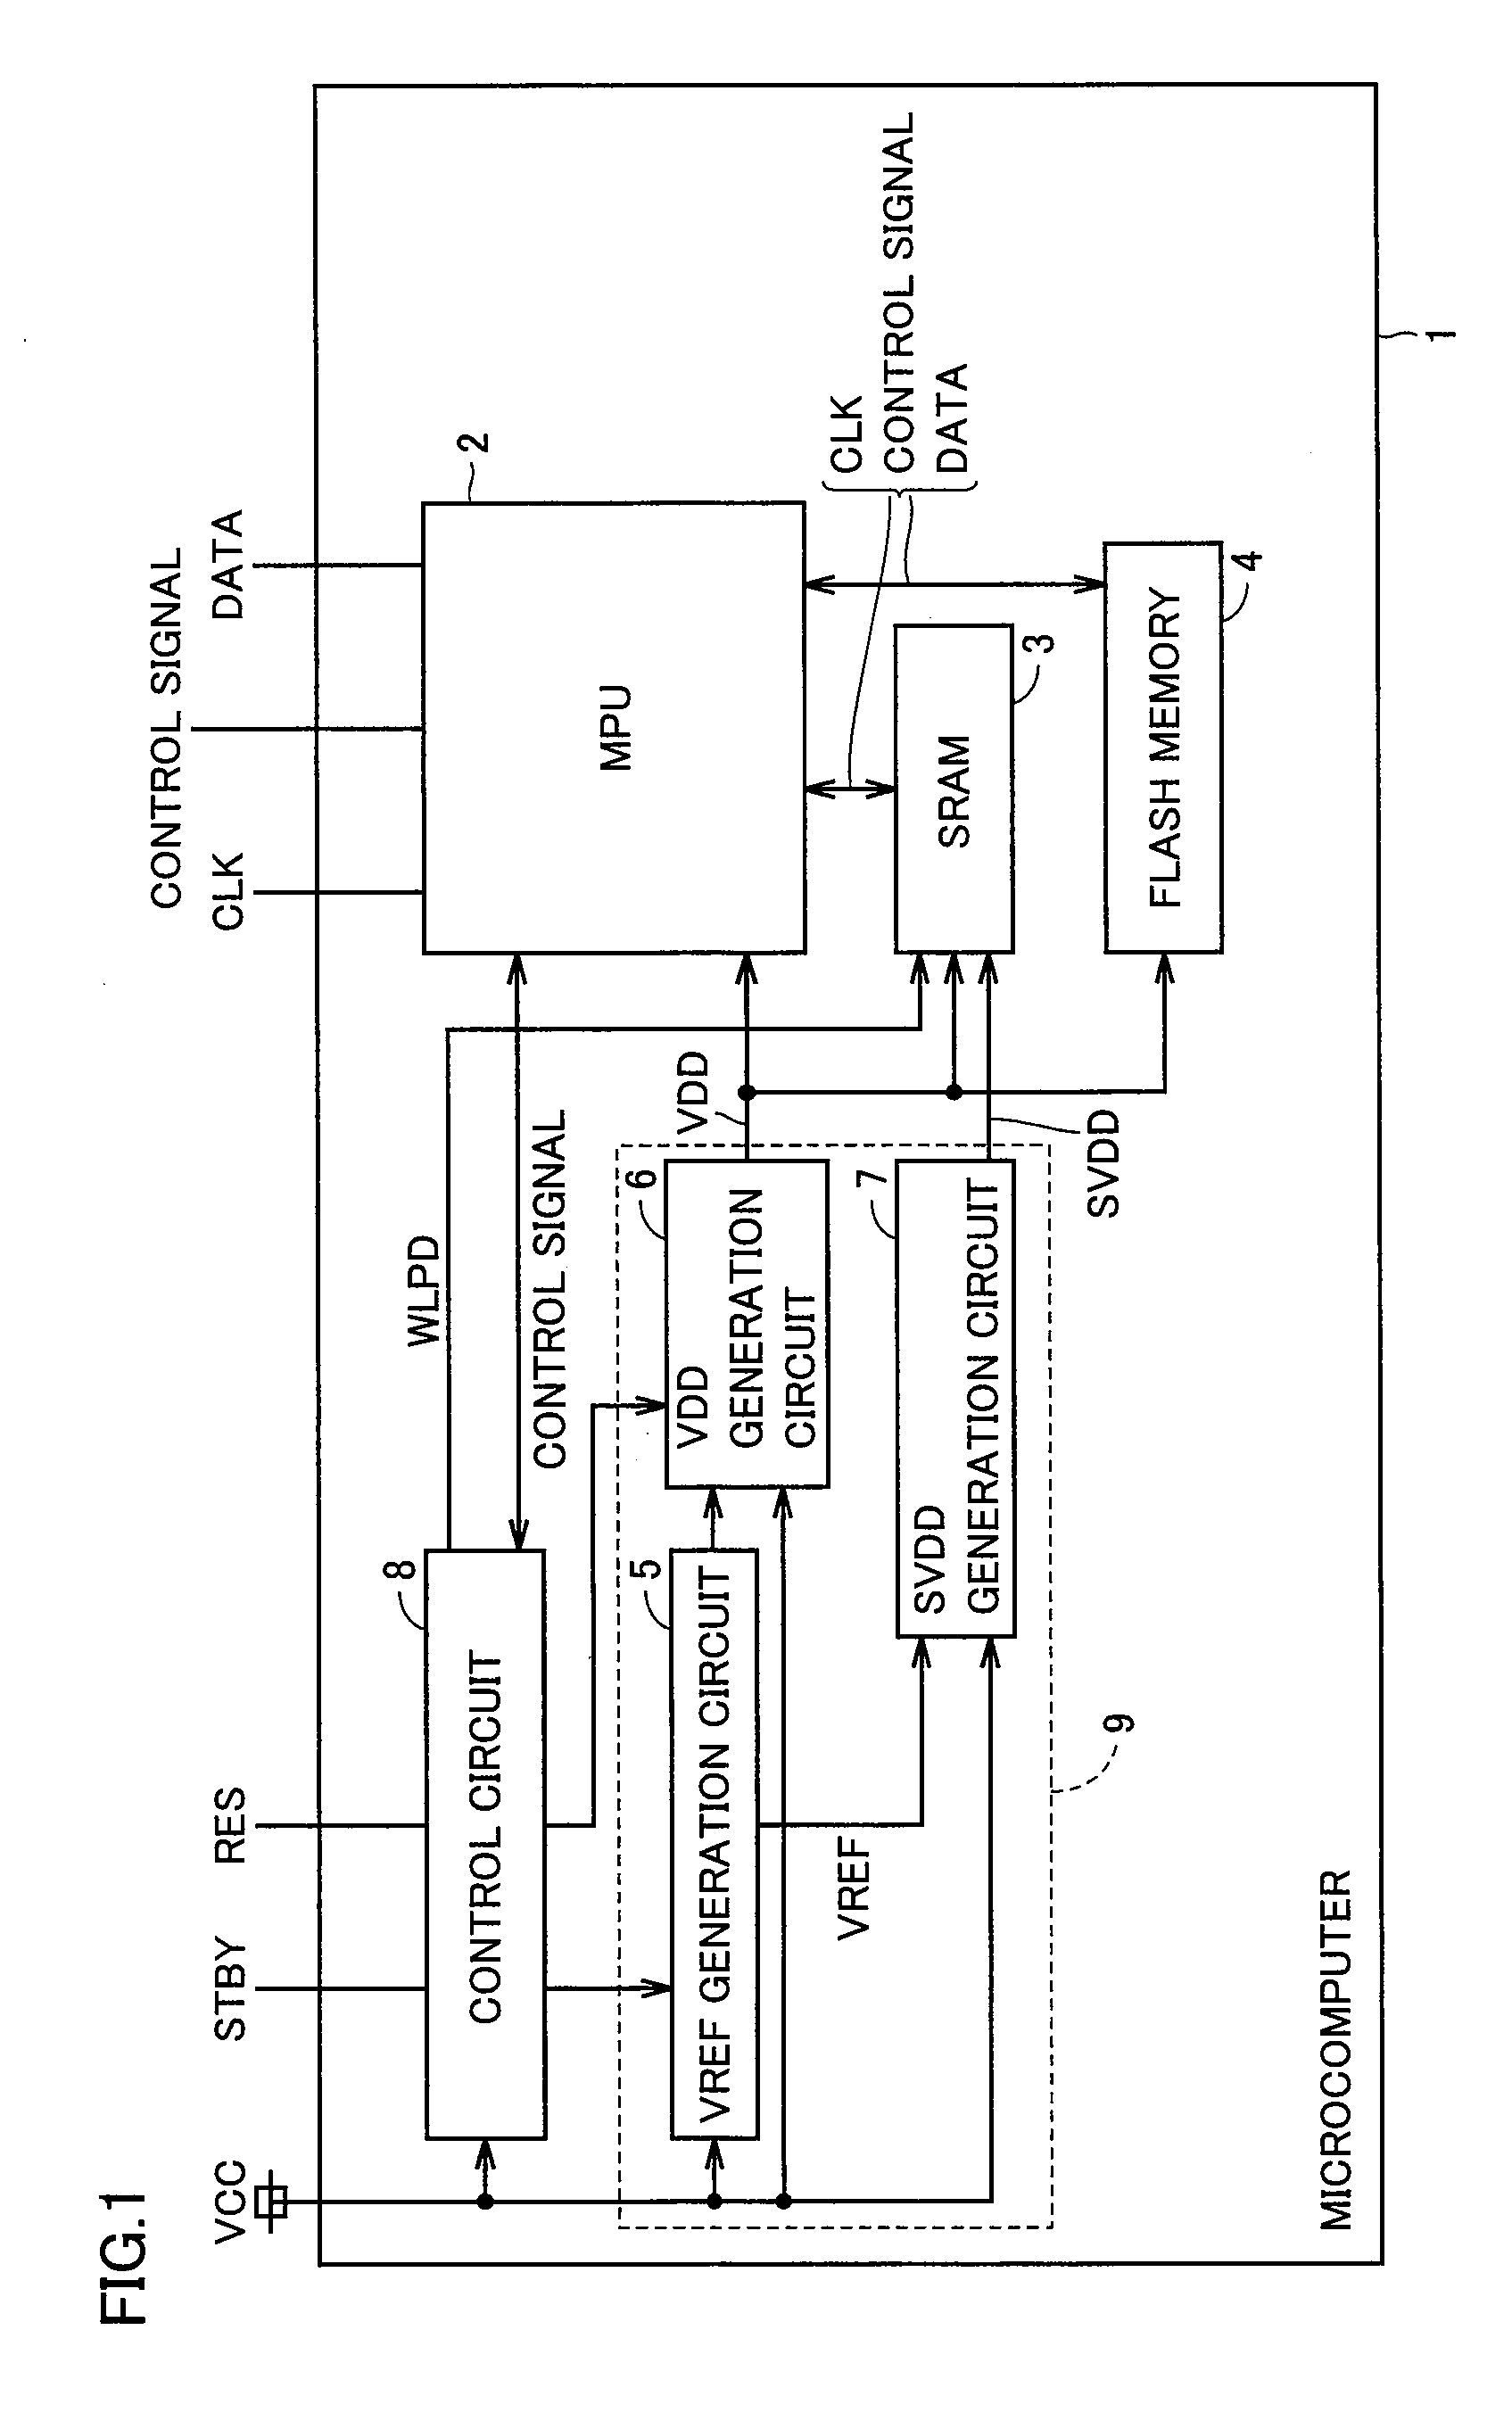 Semiconductor device for preventing erroneous write to memory cell in switching operational mode between normal mode and standby mode